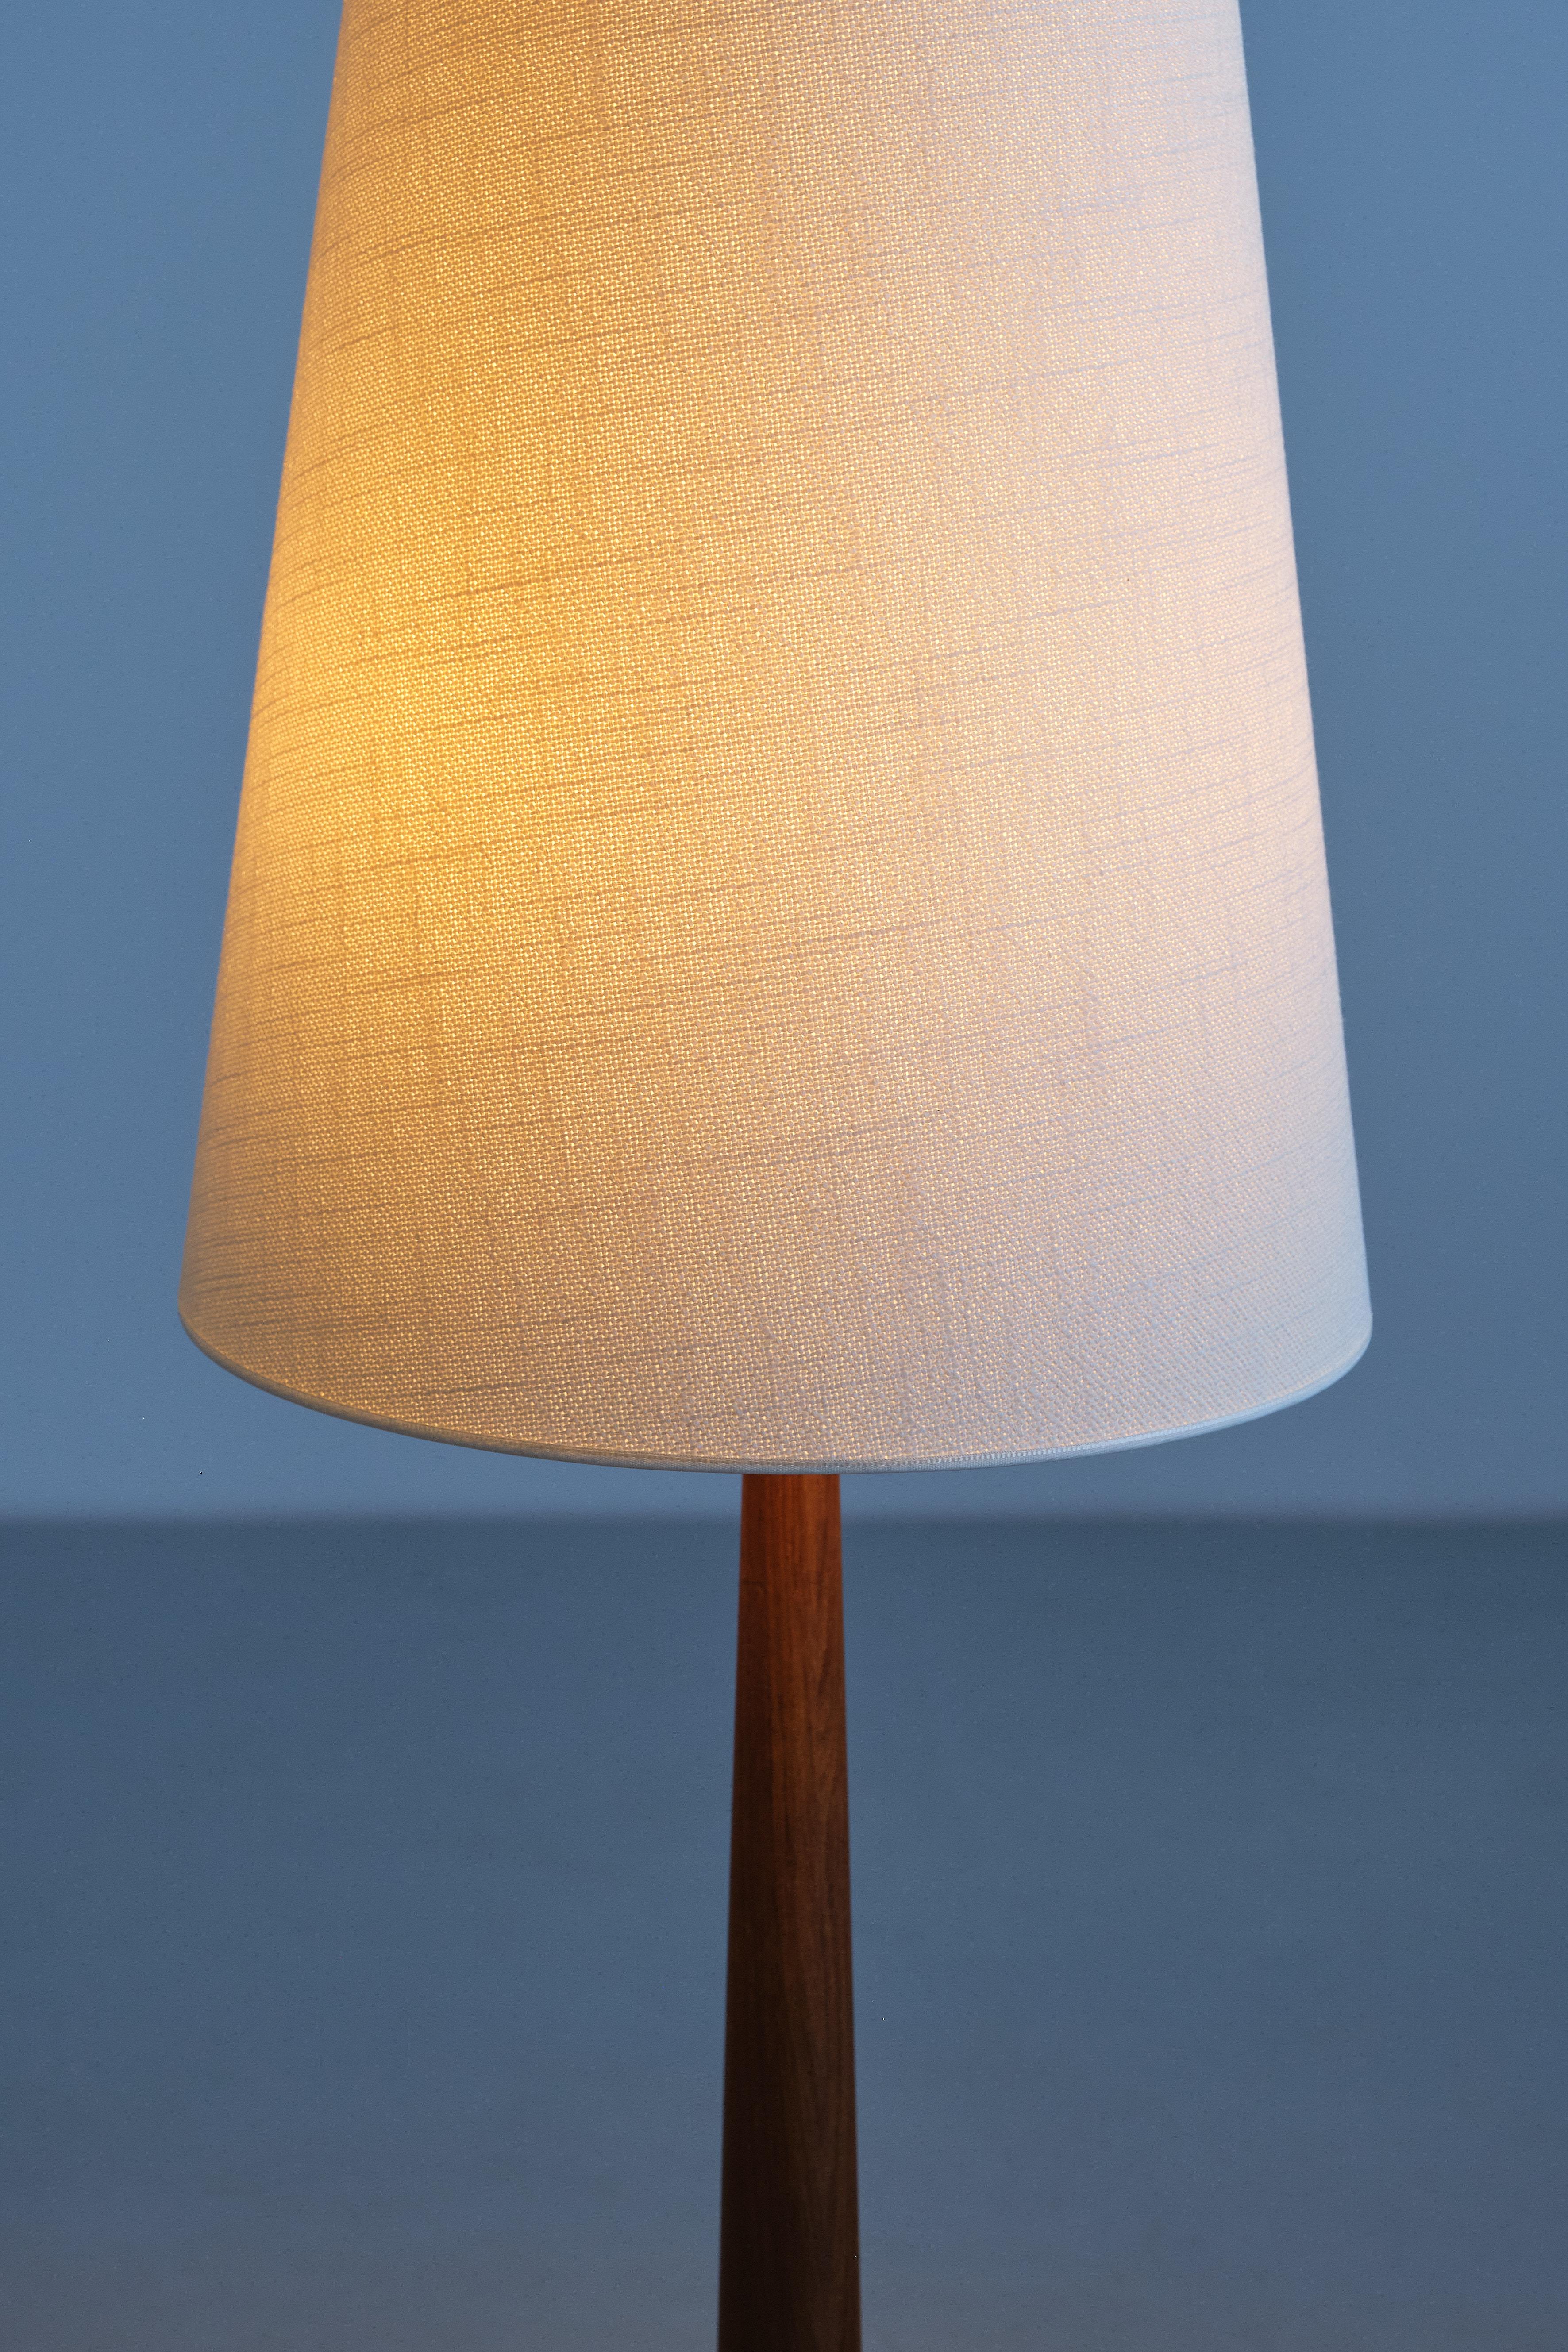 Tall Stilarmatur Tranås Table Lamp in Teak Wood with Cone Shade, Sweden, 1960s For Sale 1